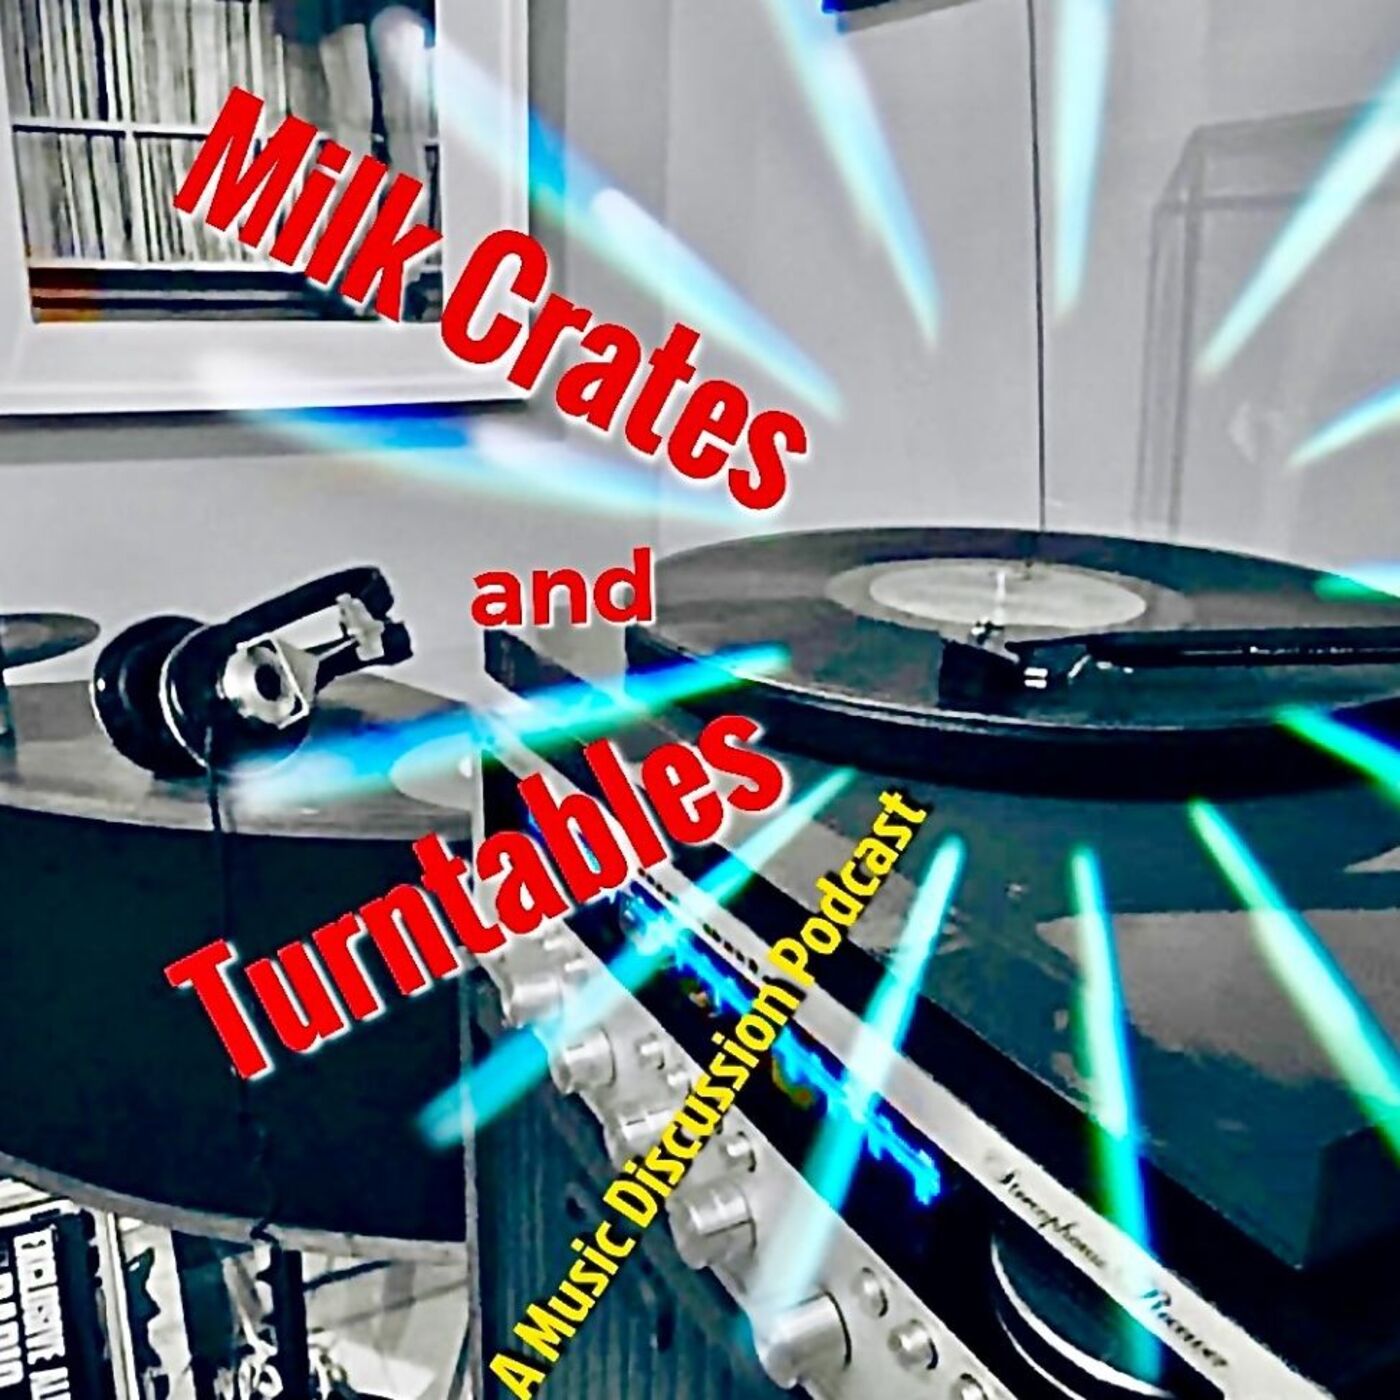 Fresh update on "zealand" discussed on Milk Crates and Turntables. A Music Discussion Podcast